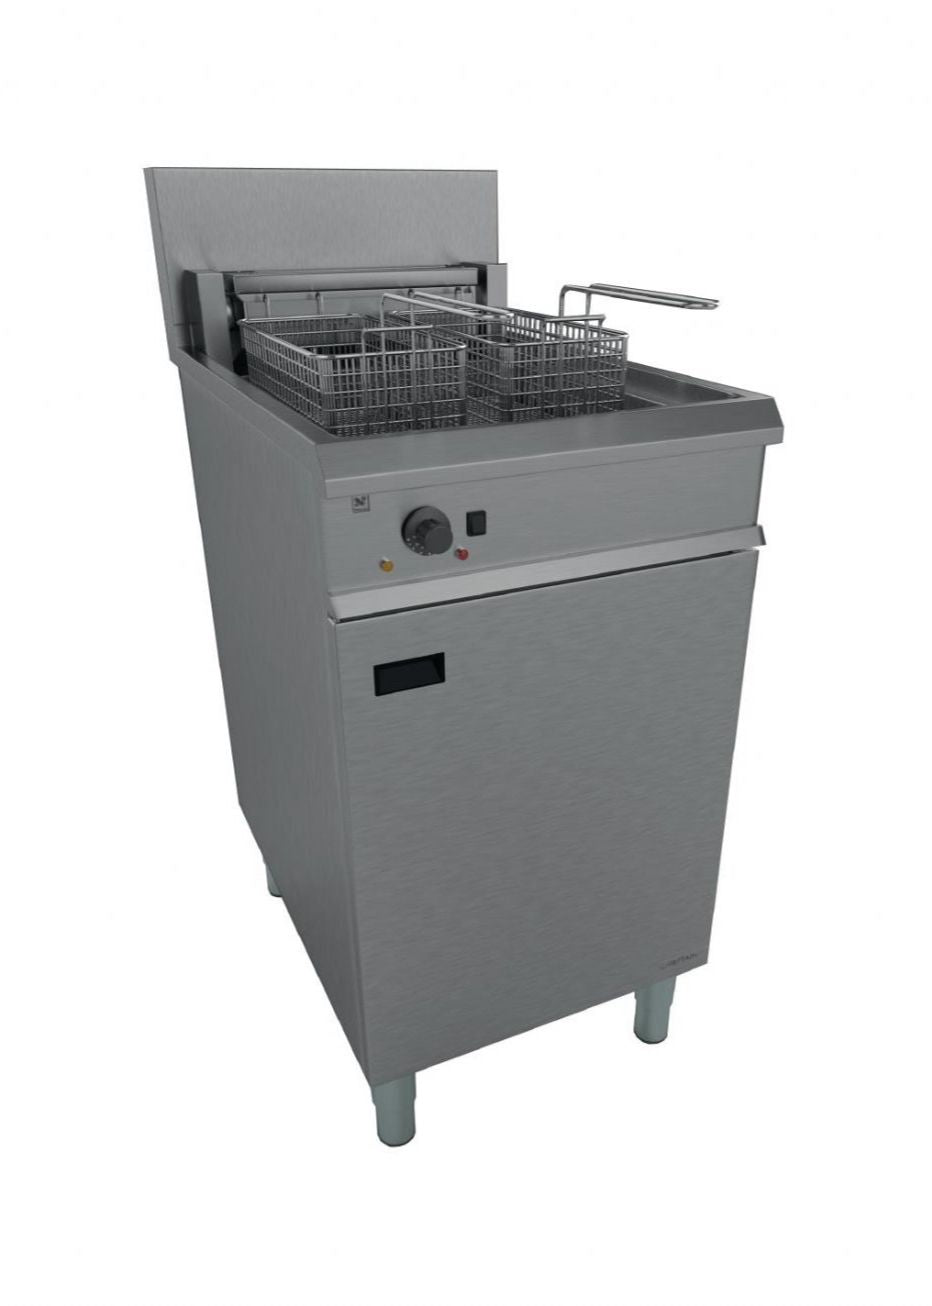 Falcon Chieftain Twin Tank Twin Basket Free Standing Electric Fryer E1848 JD Catering Equipment Solutions Ltd